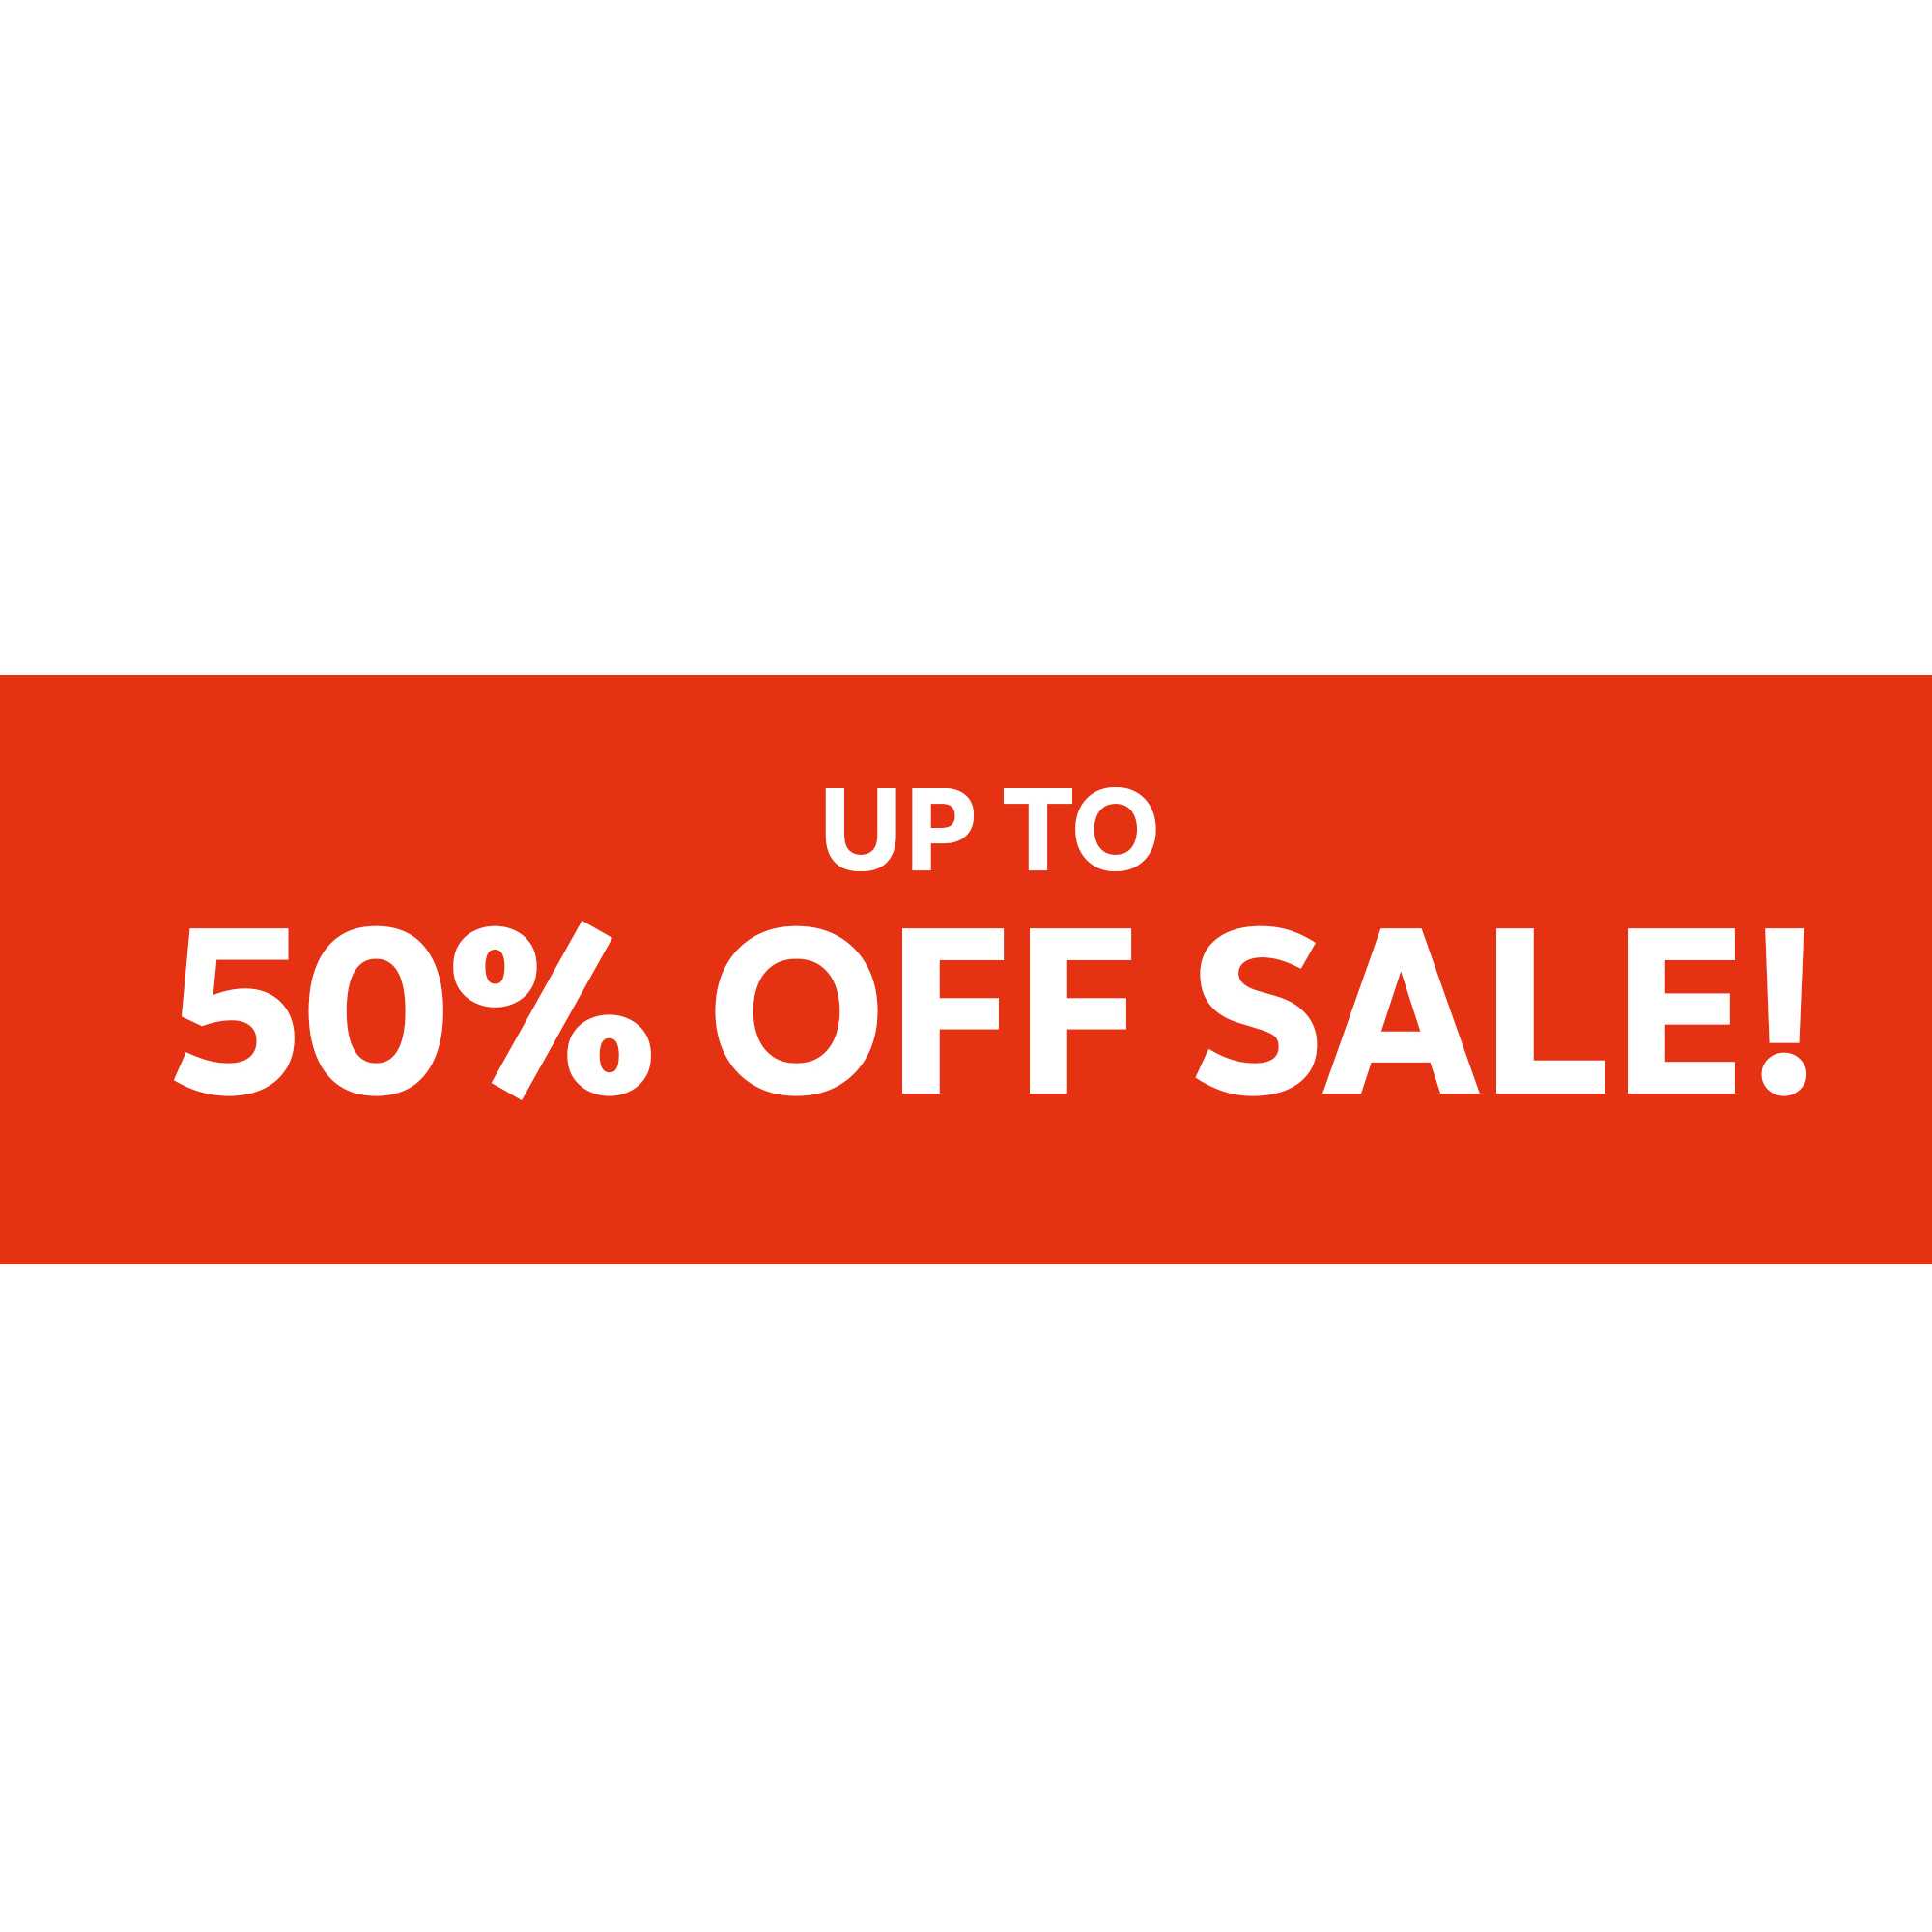 Up to 50% off sale!